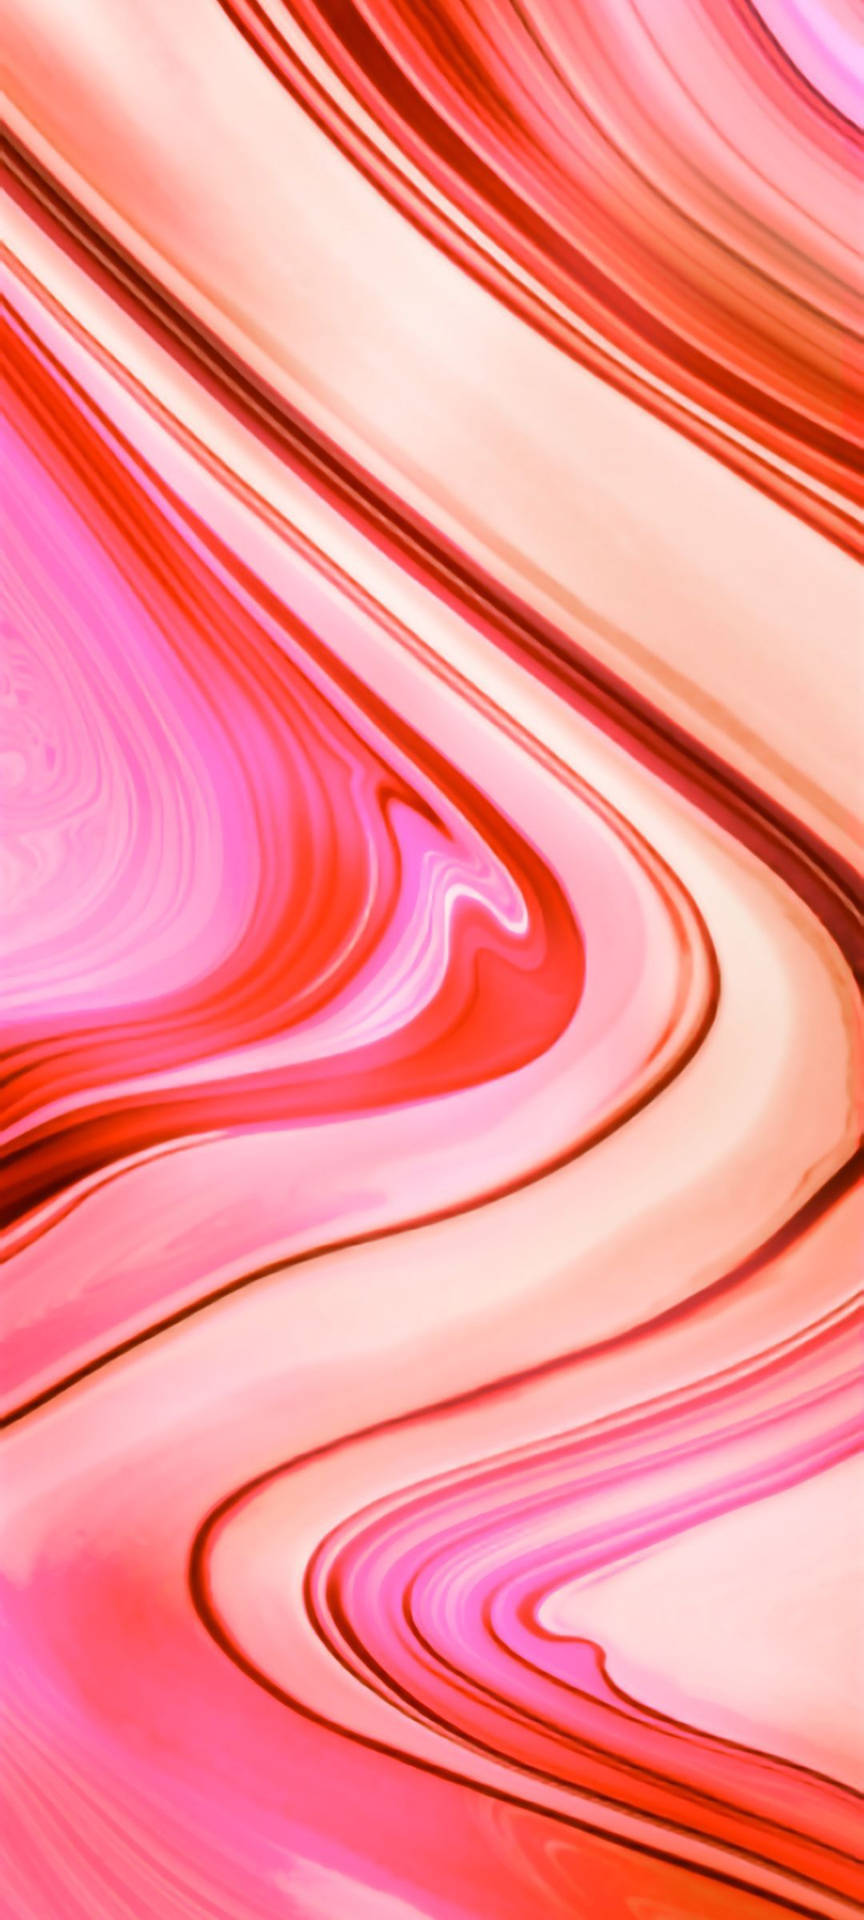 Vibrant Redmi 9 With Beautiful Abstract Liquid Color Splash Background